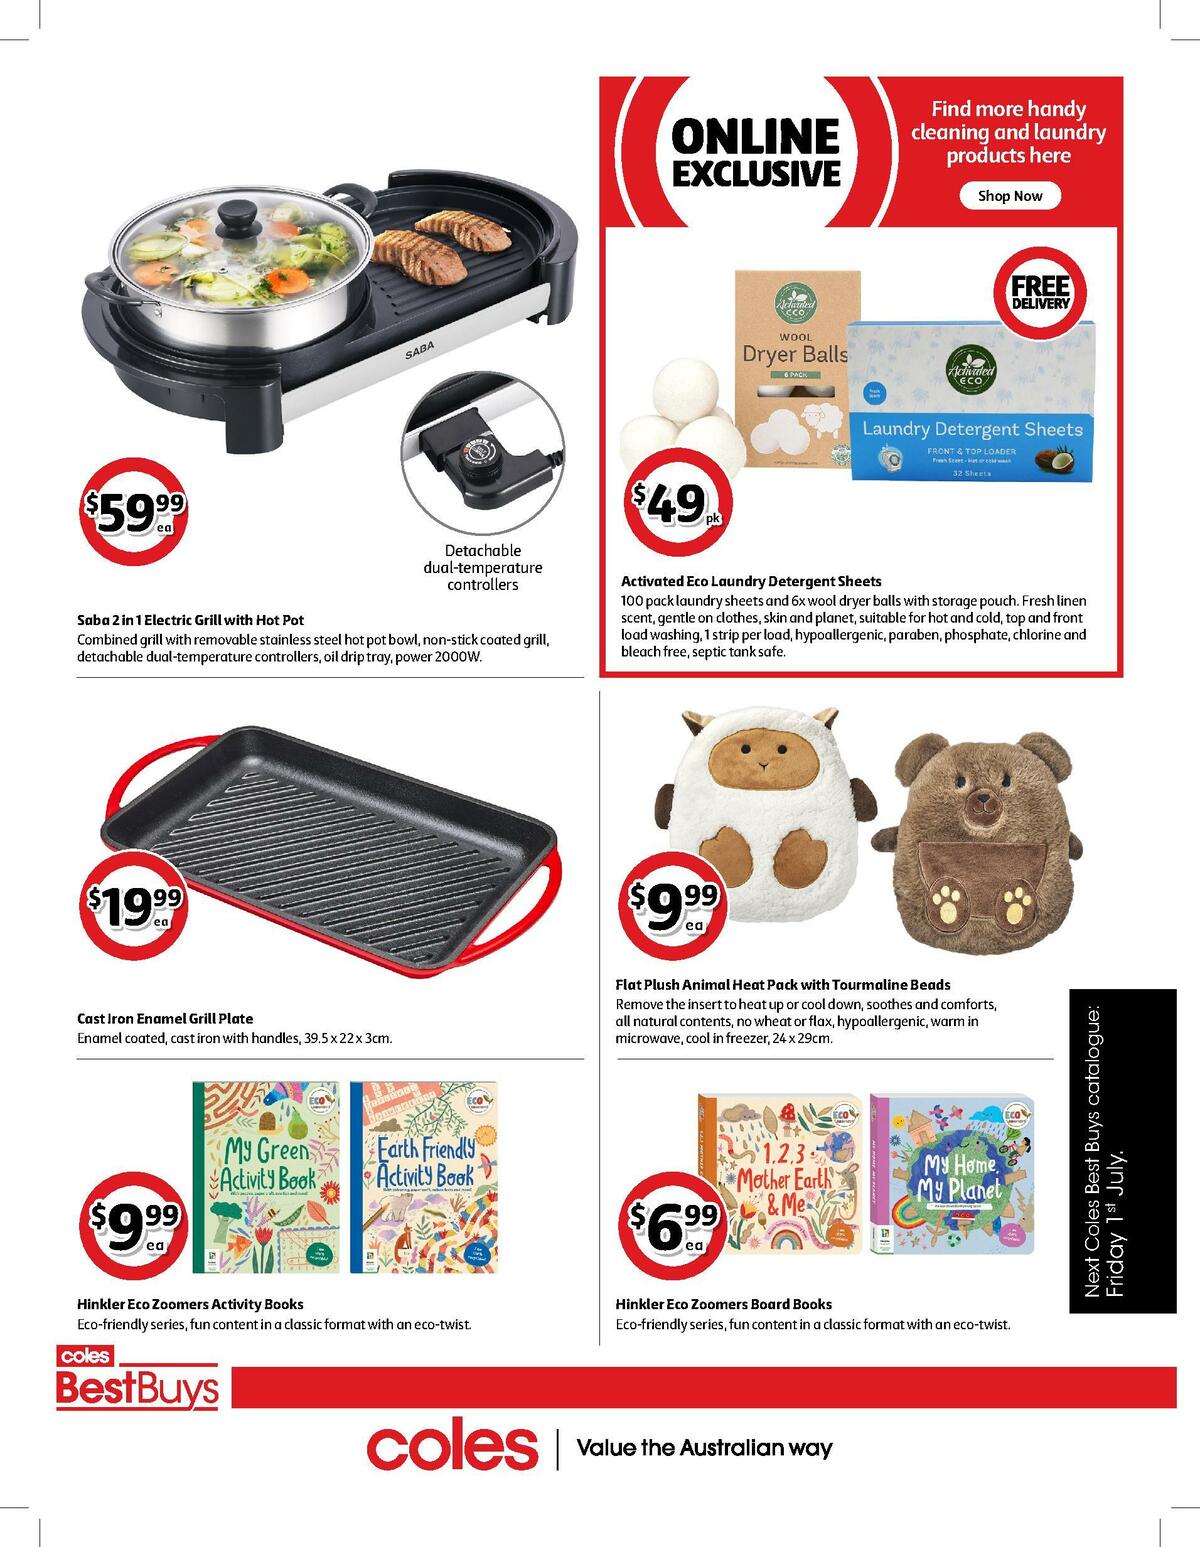 Coles Best Buys - Laundry & Storage Catalogues from 24 June